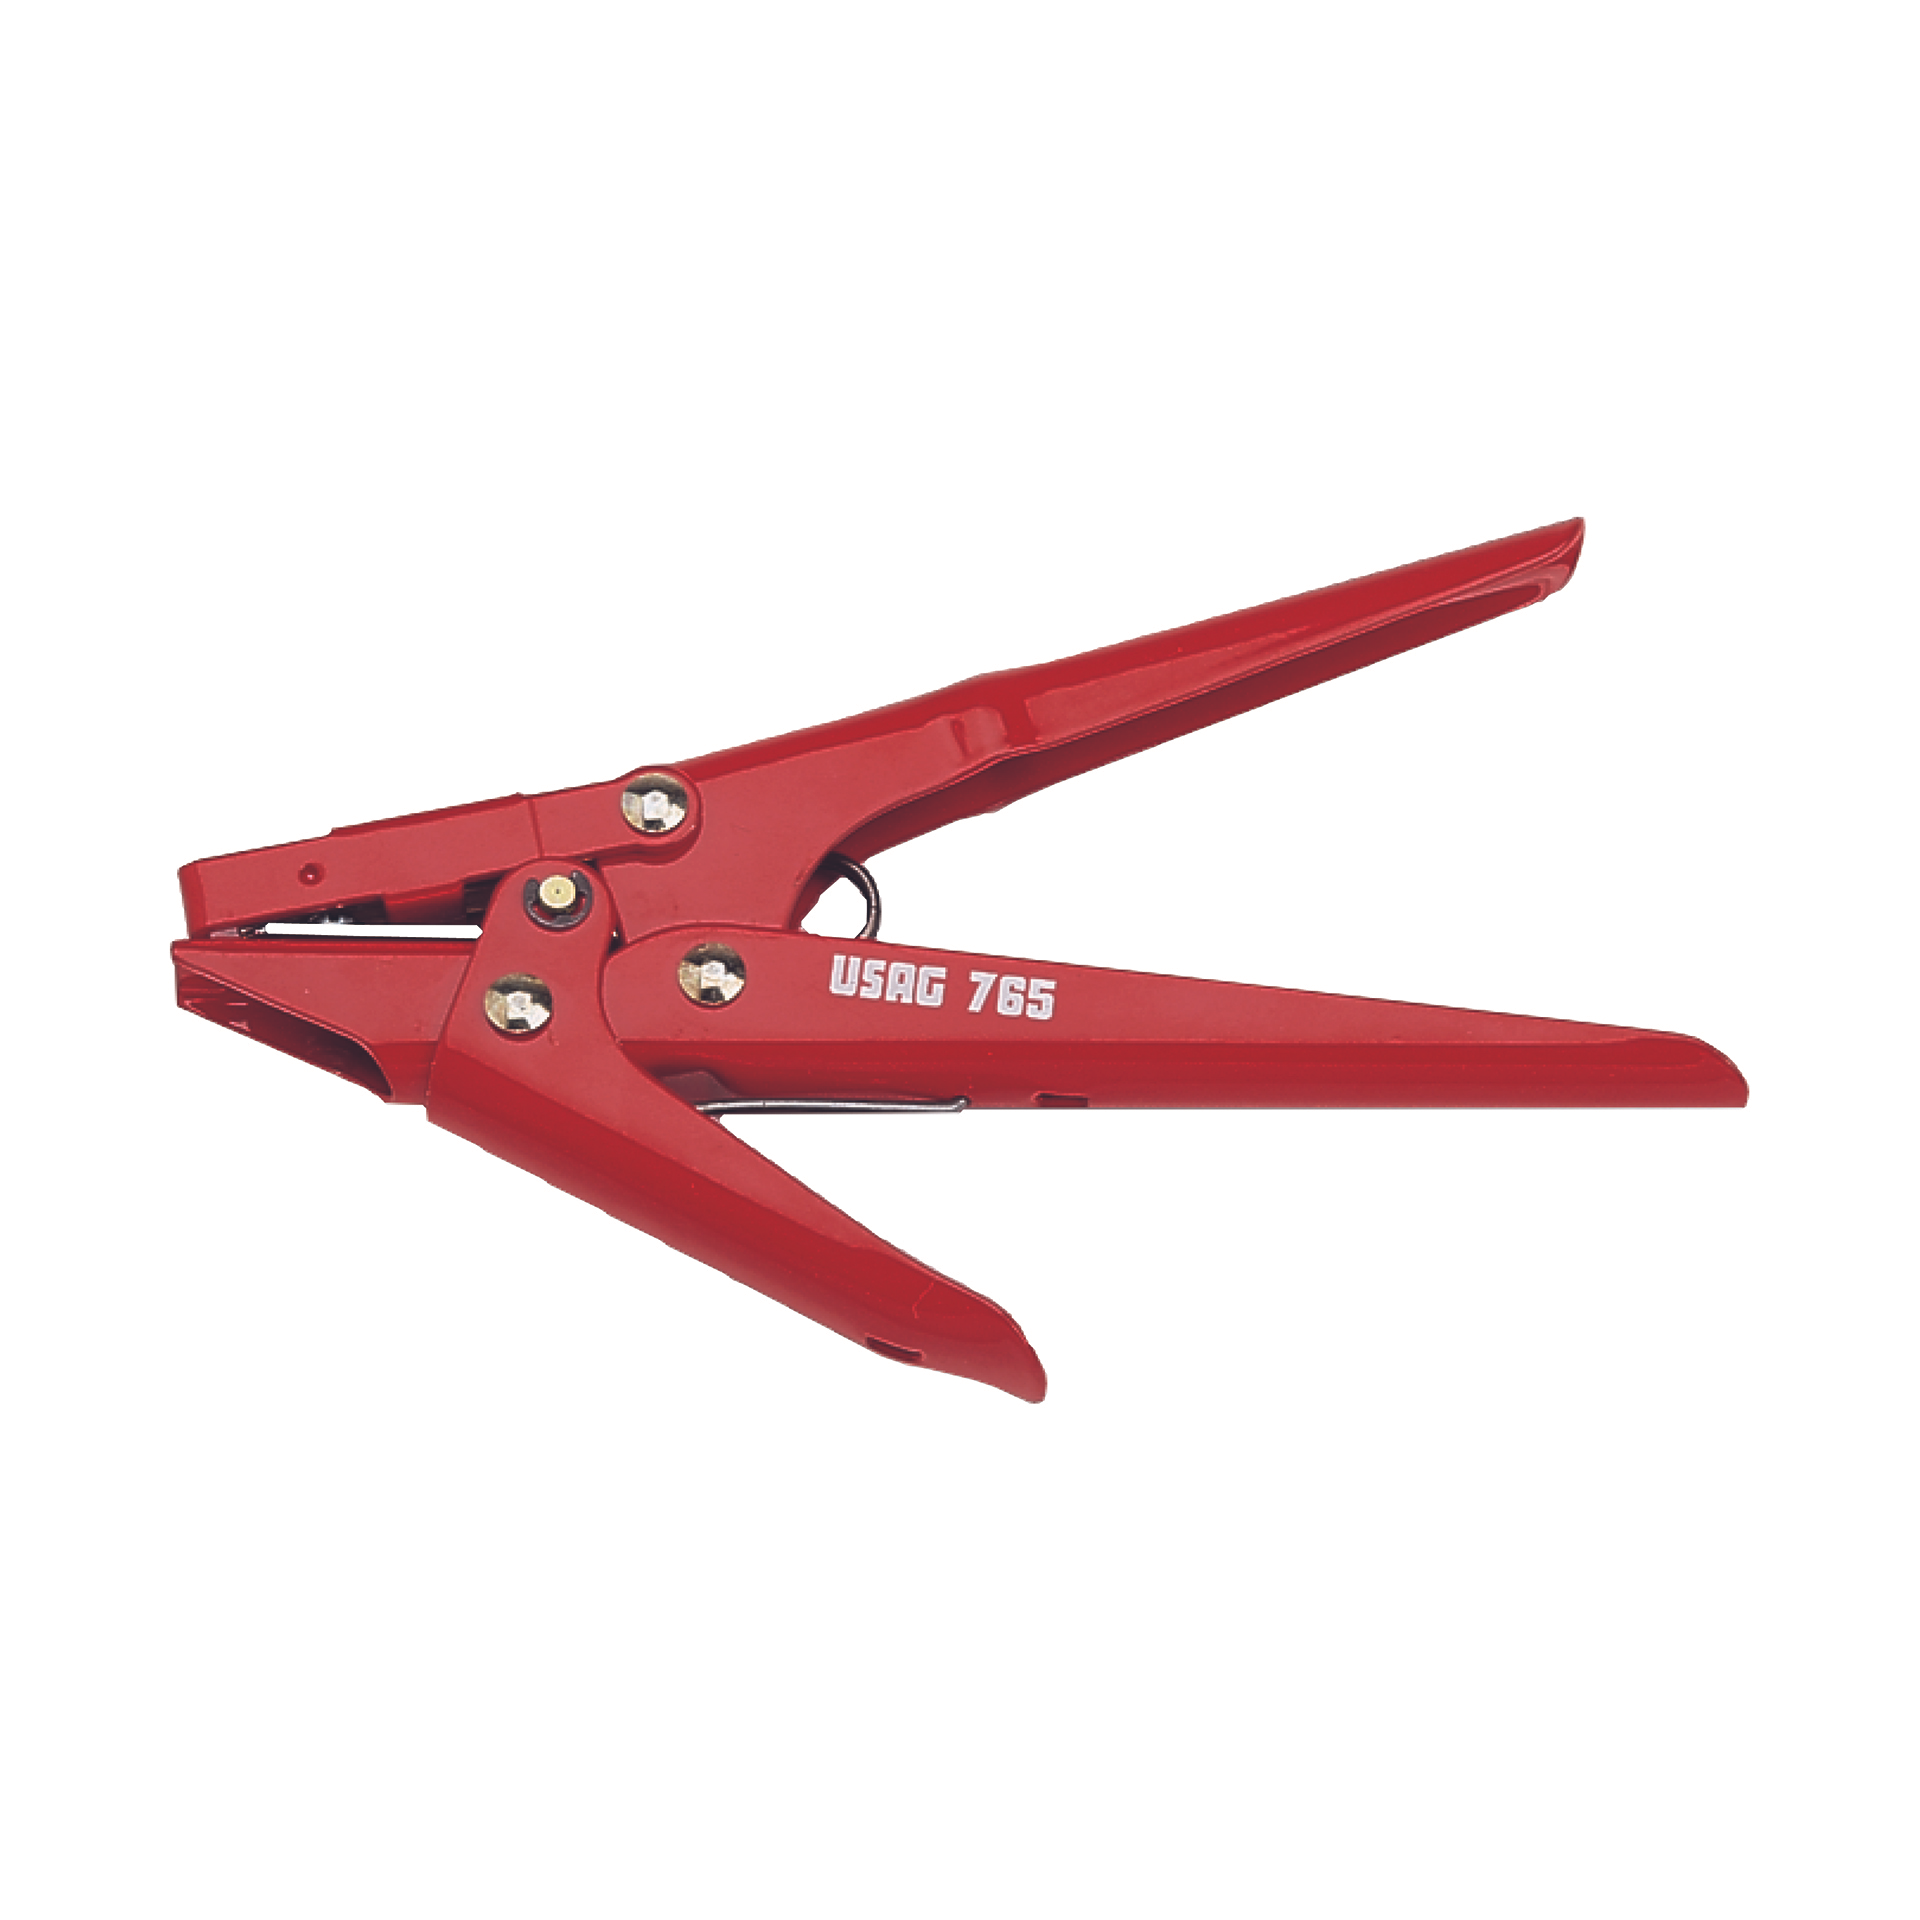 Cable tie pliers for nylon cable ties up to 9 mm wide - Usag 765